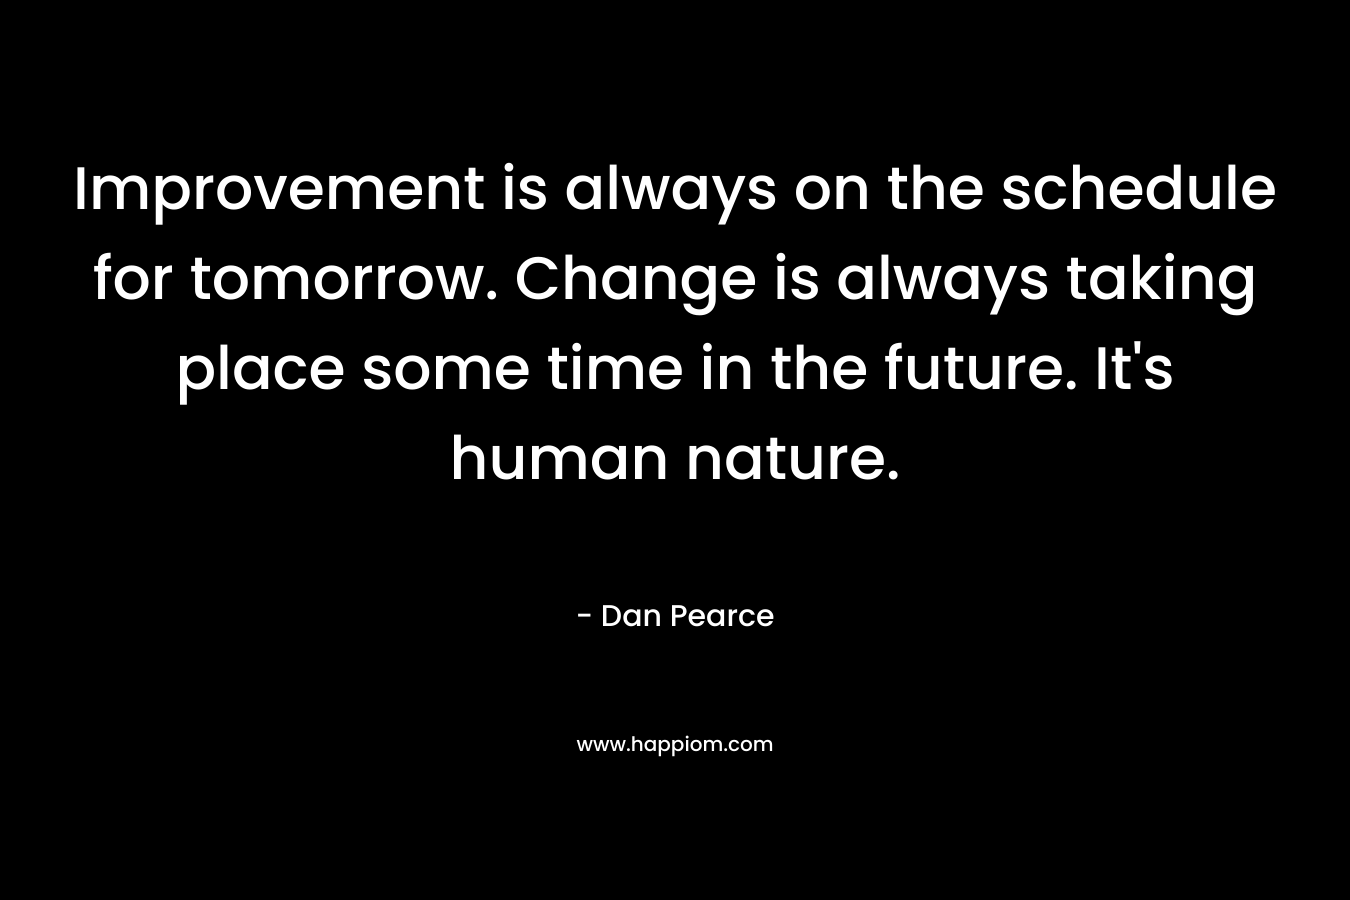 Improvement is always on the schedule for tomorrow. Change is always taking place some time in the future. It’s human nature. – Dan Pearce